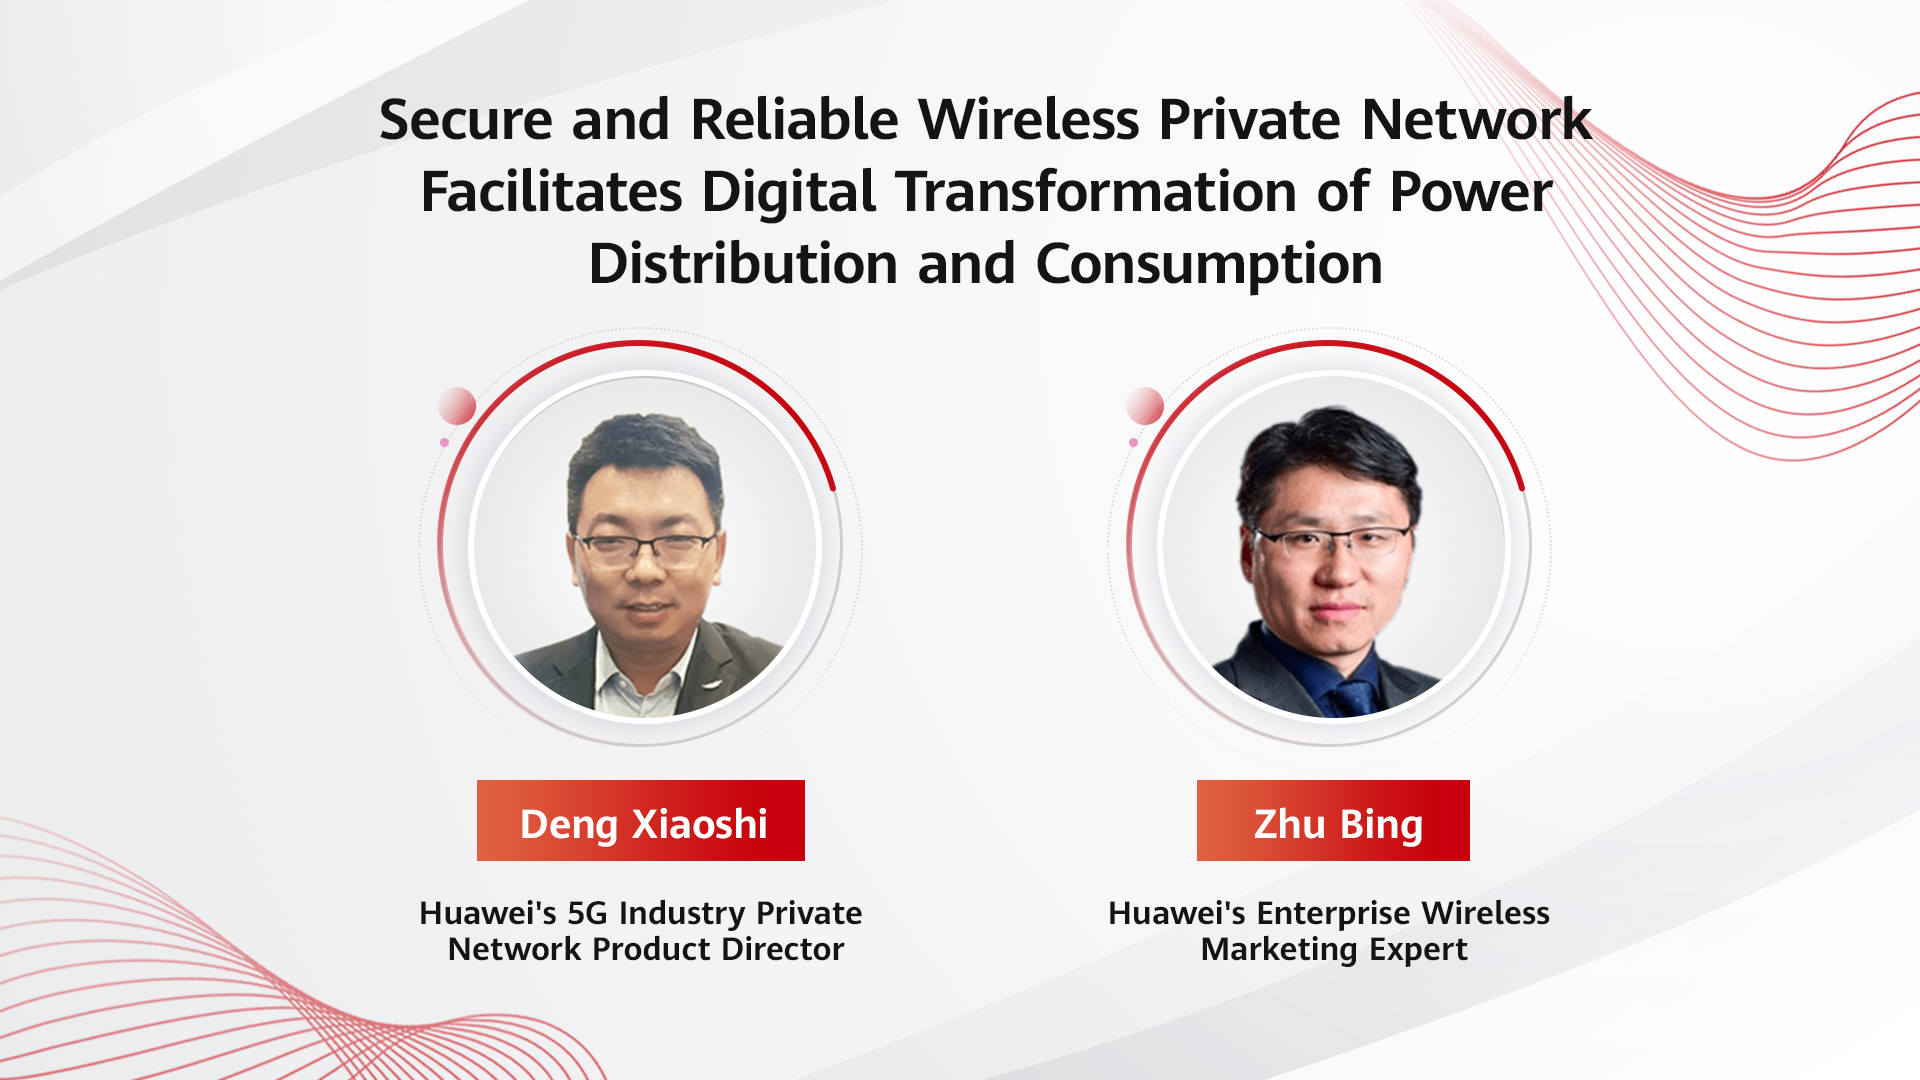 Secure and Reliable Wireless Private Network Facilitates Digital Transformation of Power Distribution and Consumption